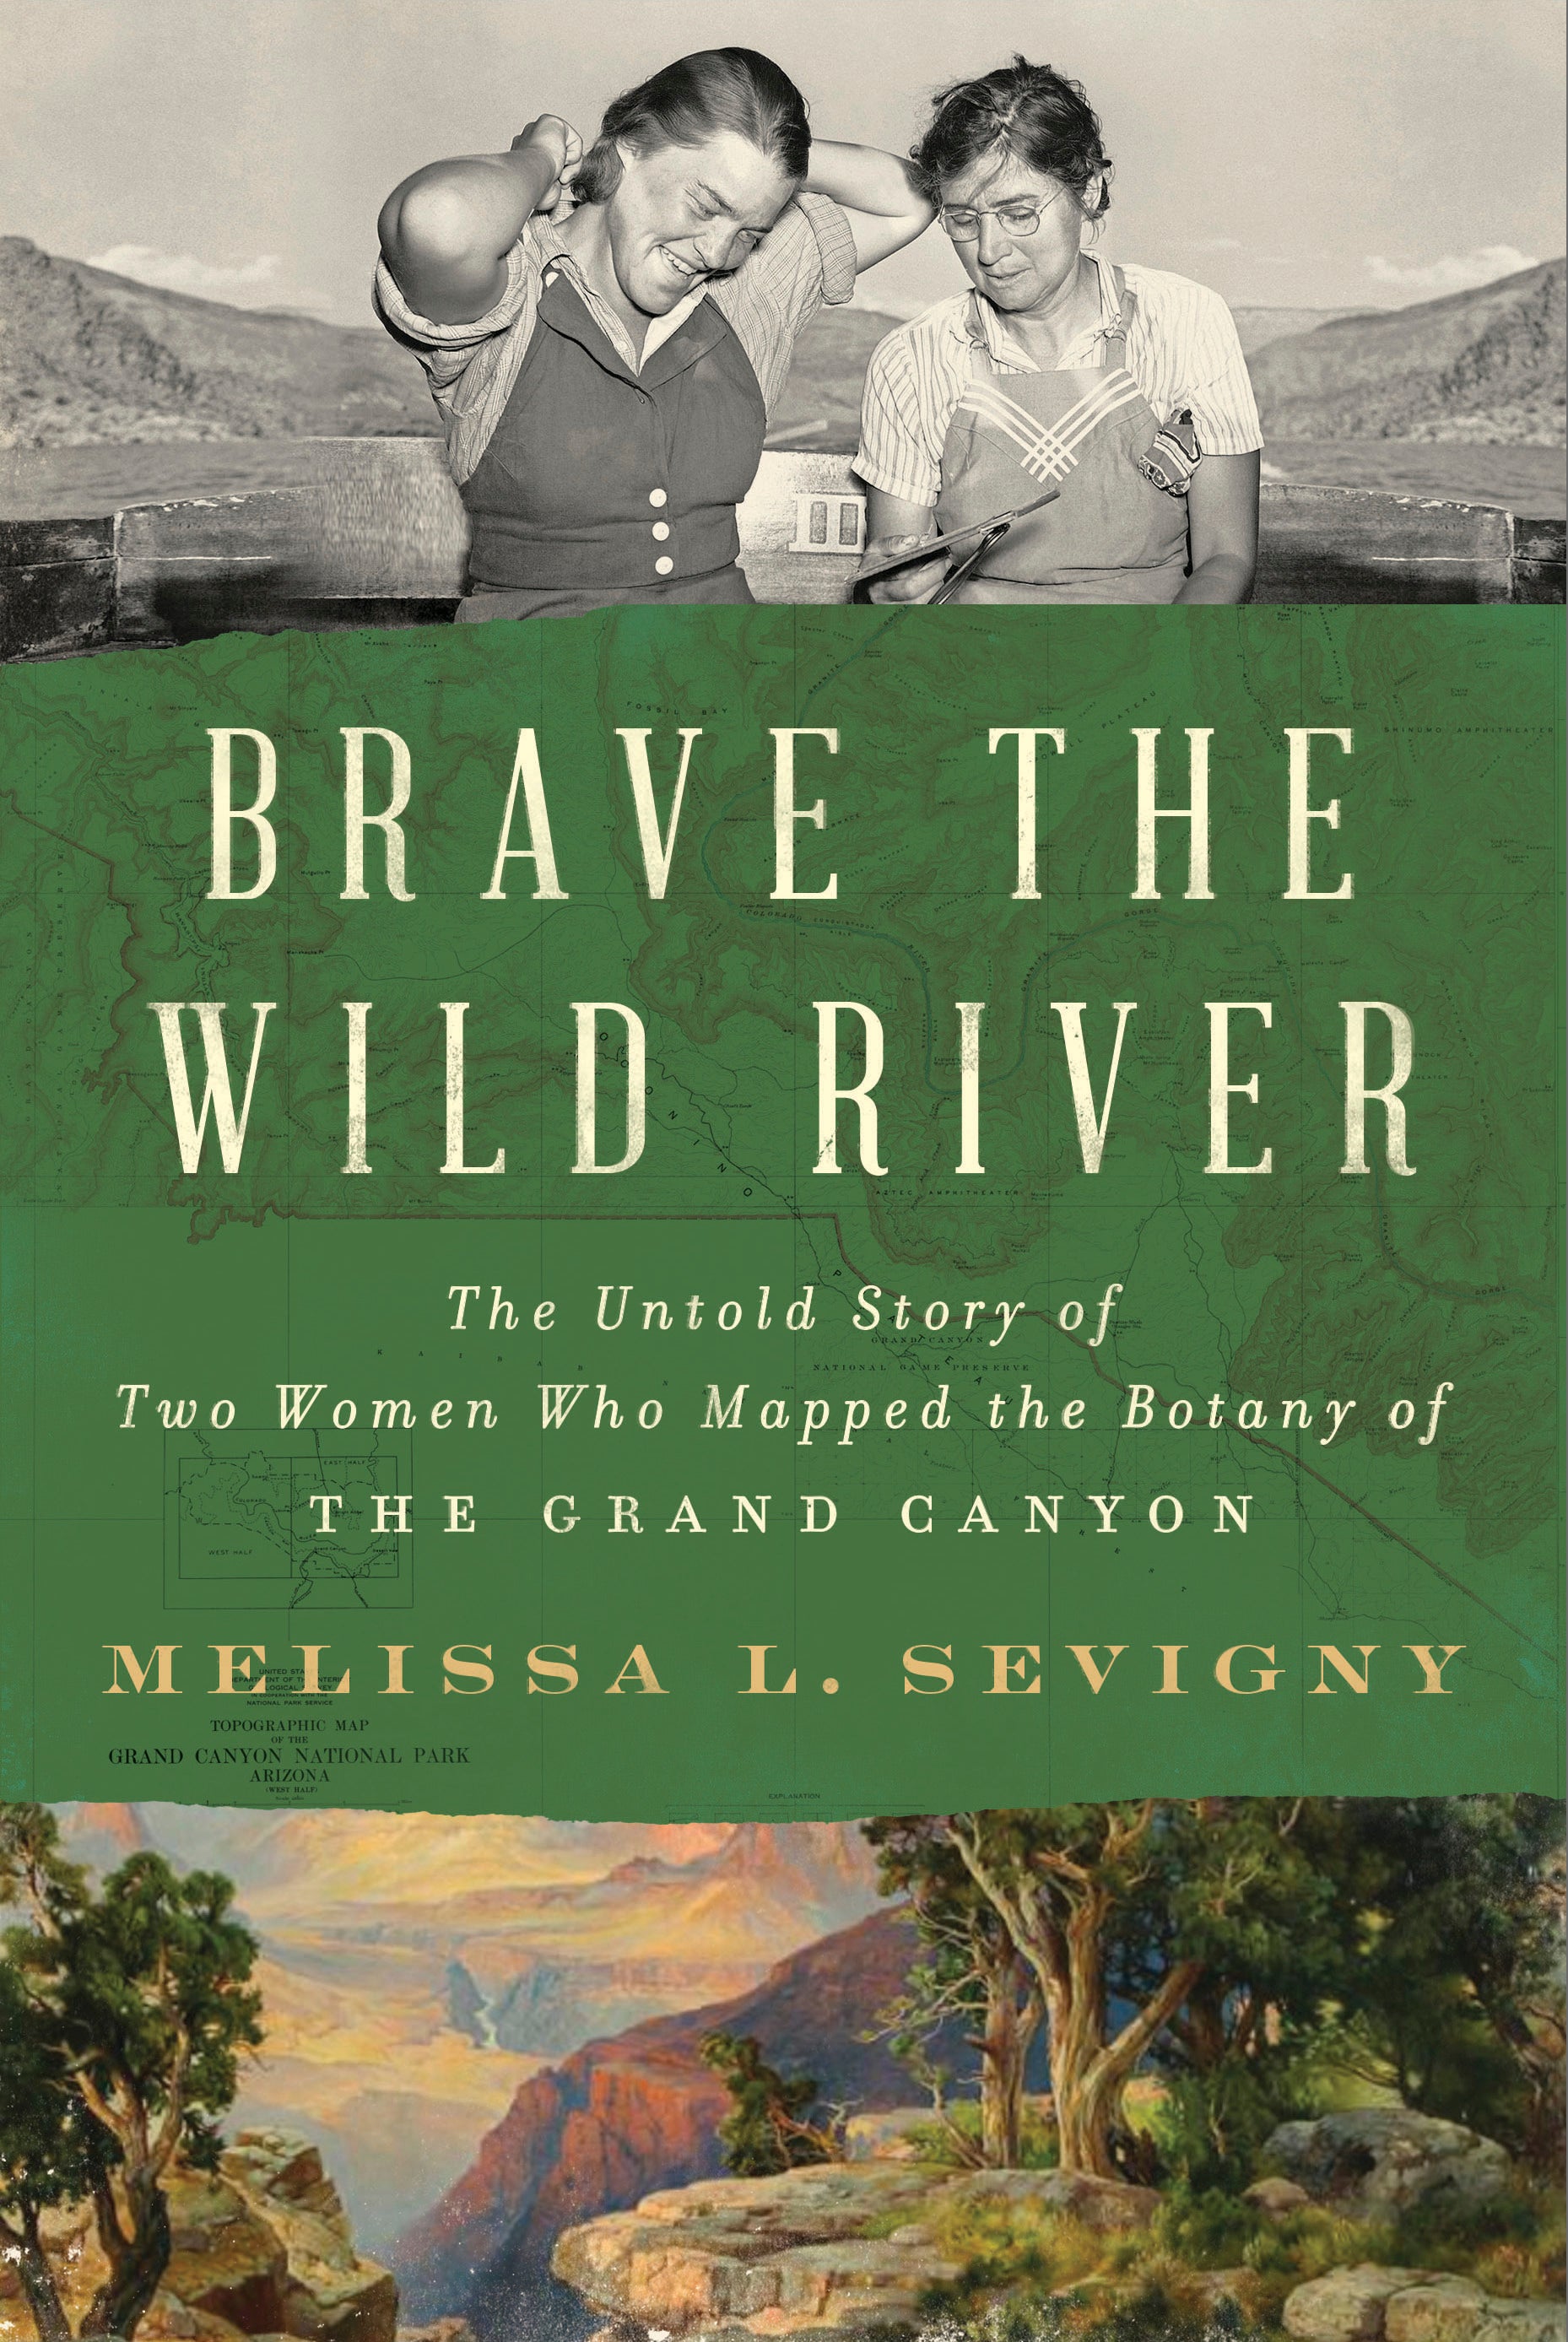 Book Review In Brave the Wild River, the true story of 2 scientists who explored the Grand Canyon The Independent pic